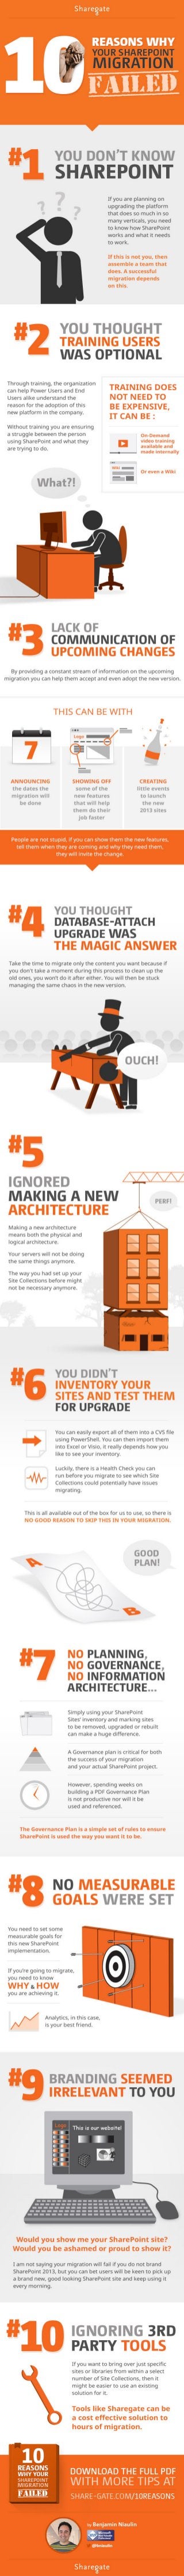 Infographic - 10 Reasons Why your SharePoint Migration Failed